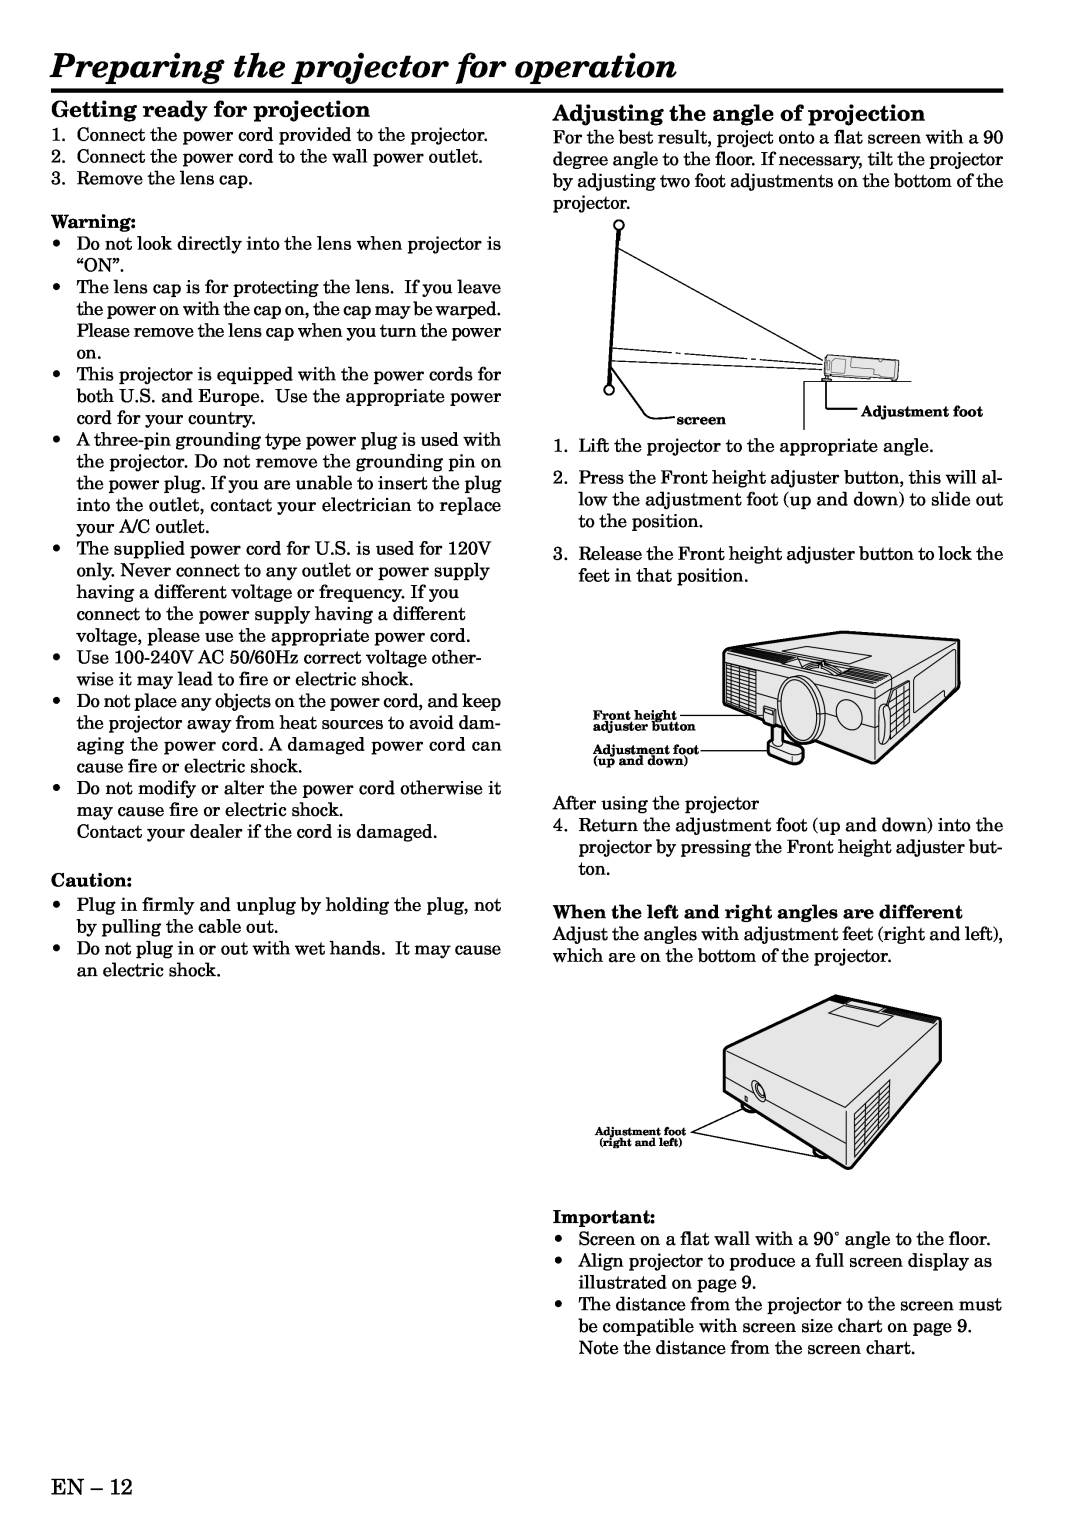 Mitsubishi Electronics LVP-SA51U user manual Preparing the projector for operation, Getting ready for projection 